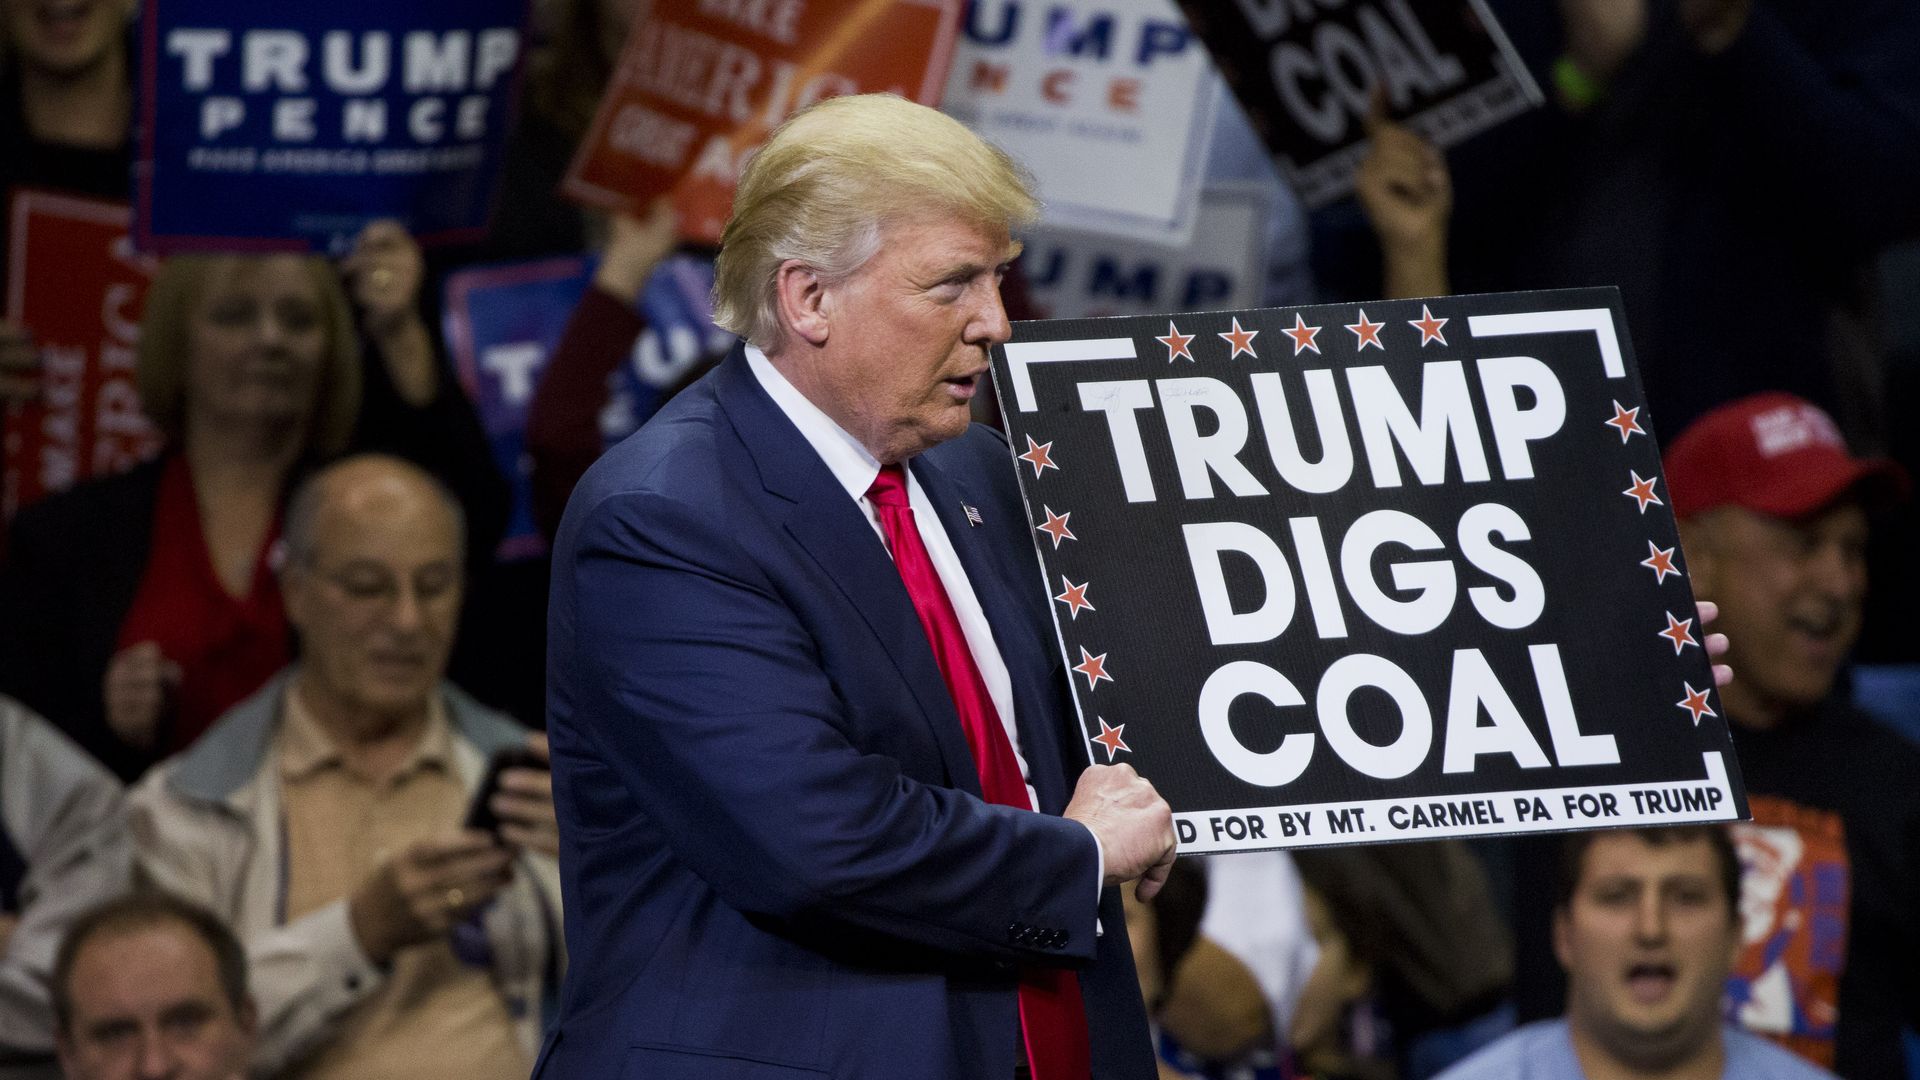 Trump at a rally holding a trump digs coal sign